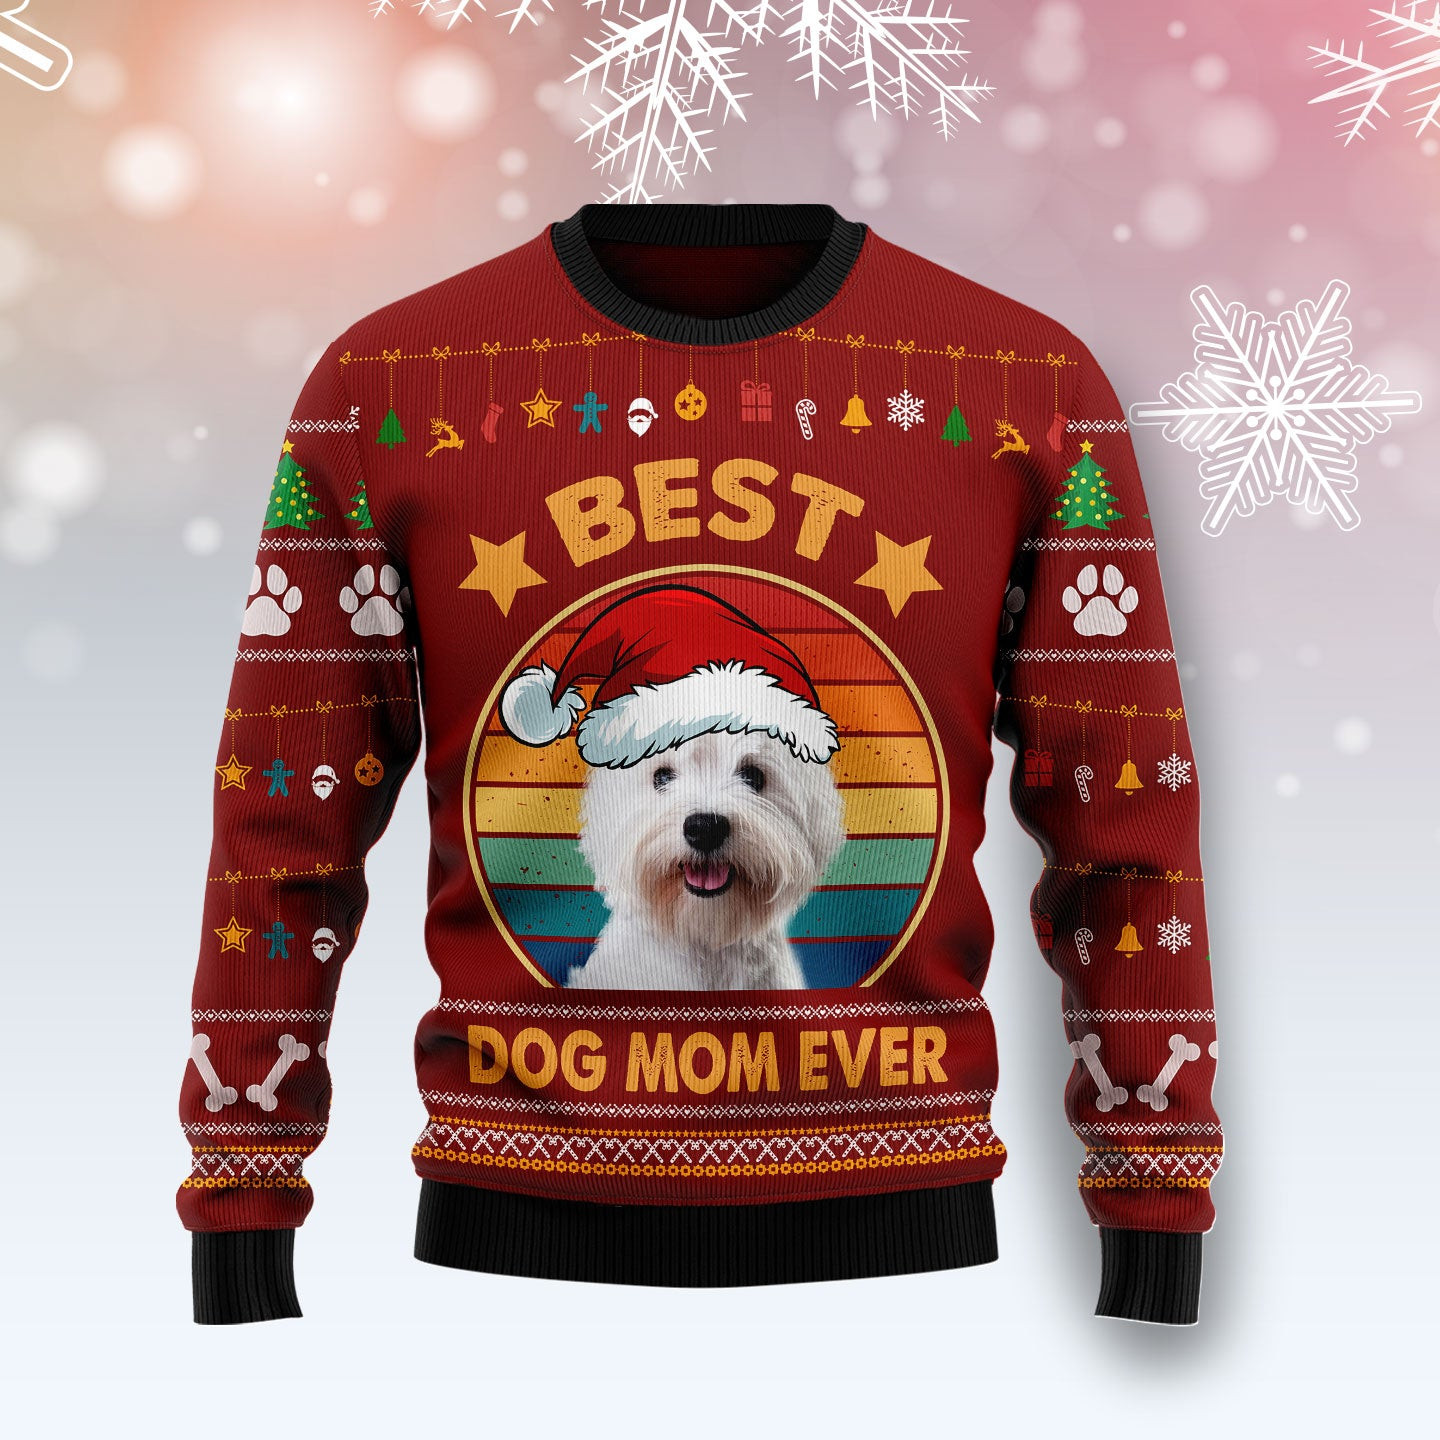 West Highland White Terrier Best Dog Mom Ever Ugly Christmas Sweater